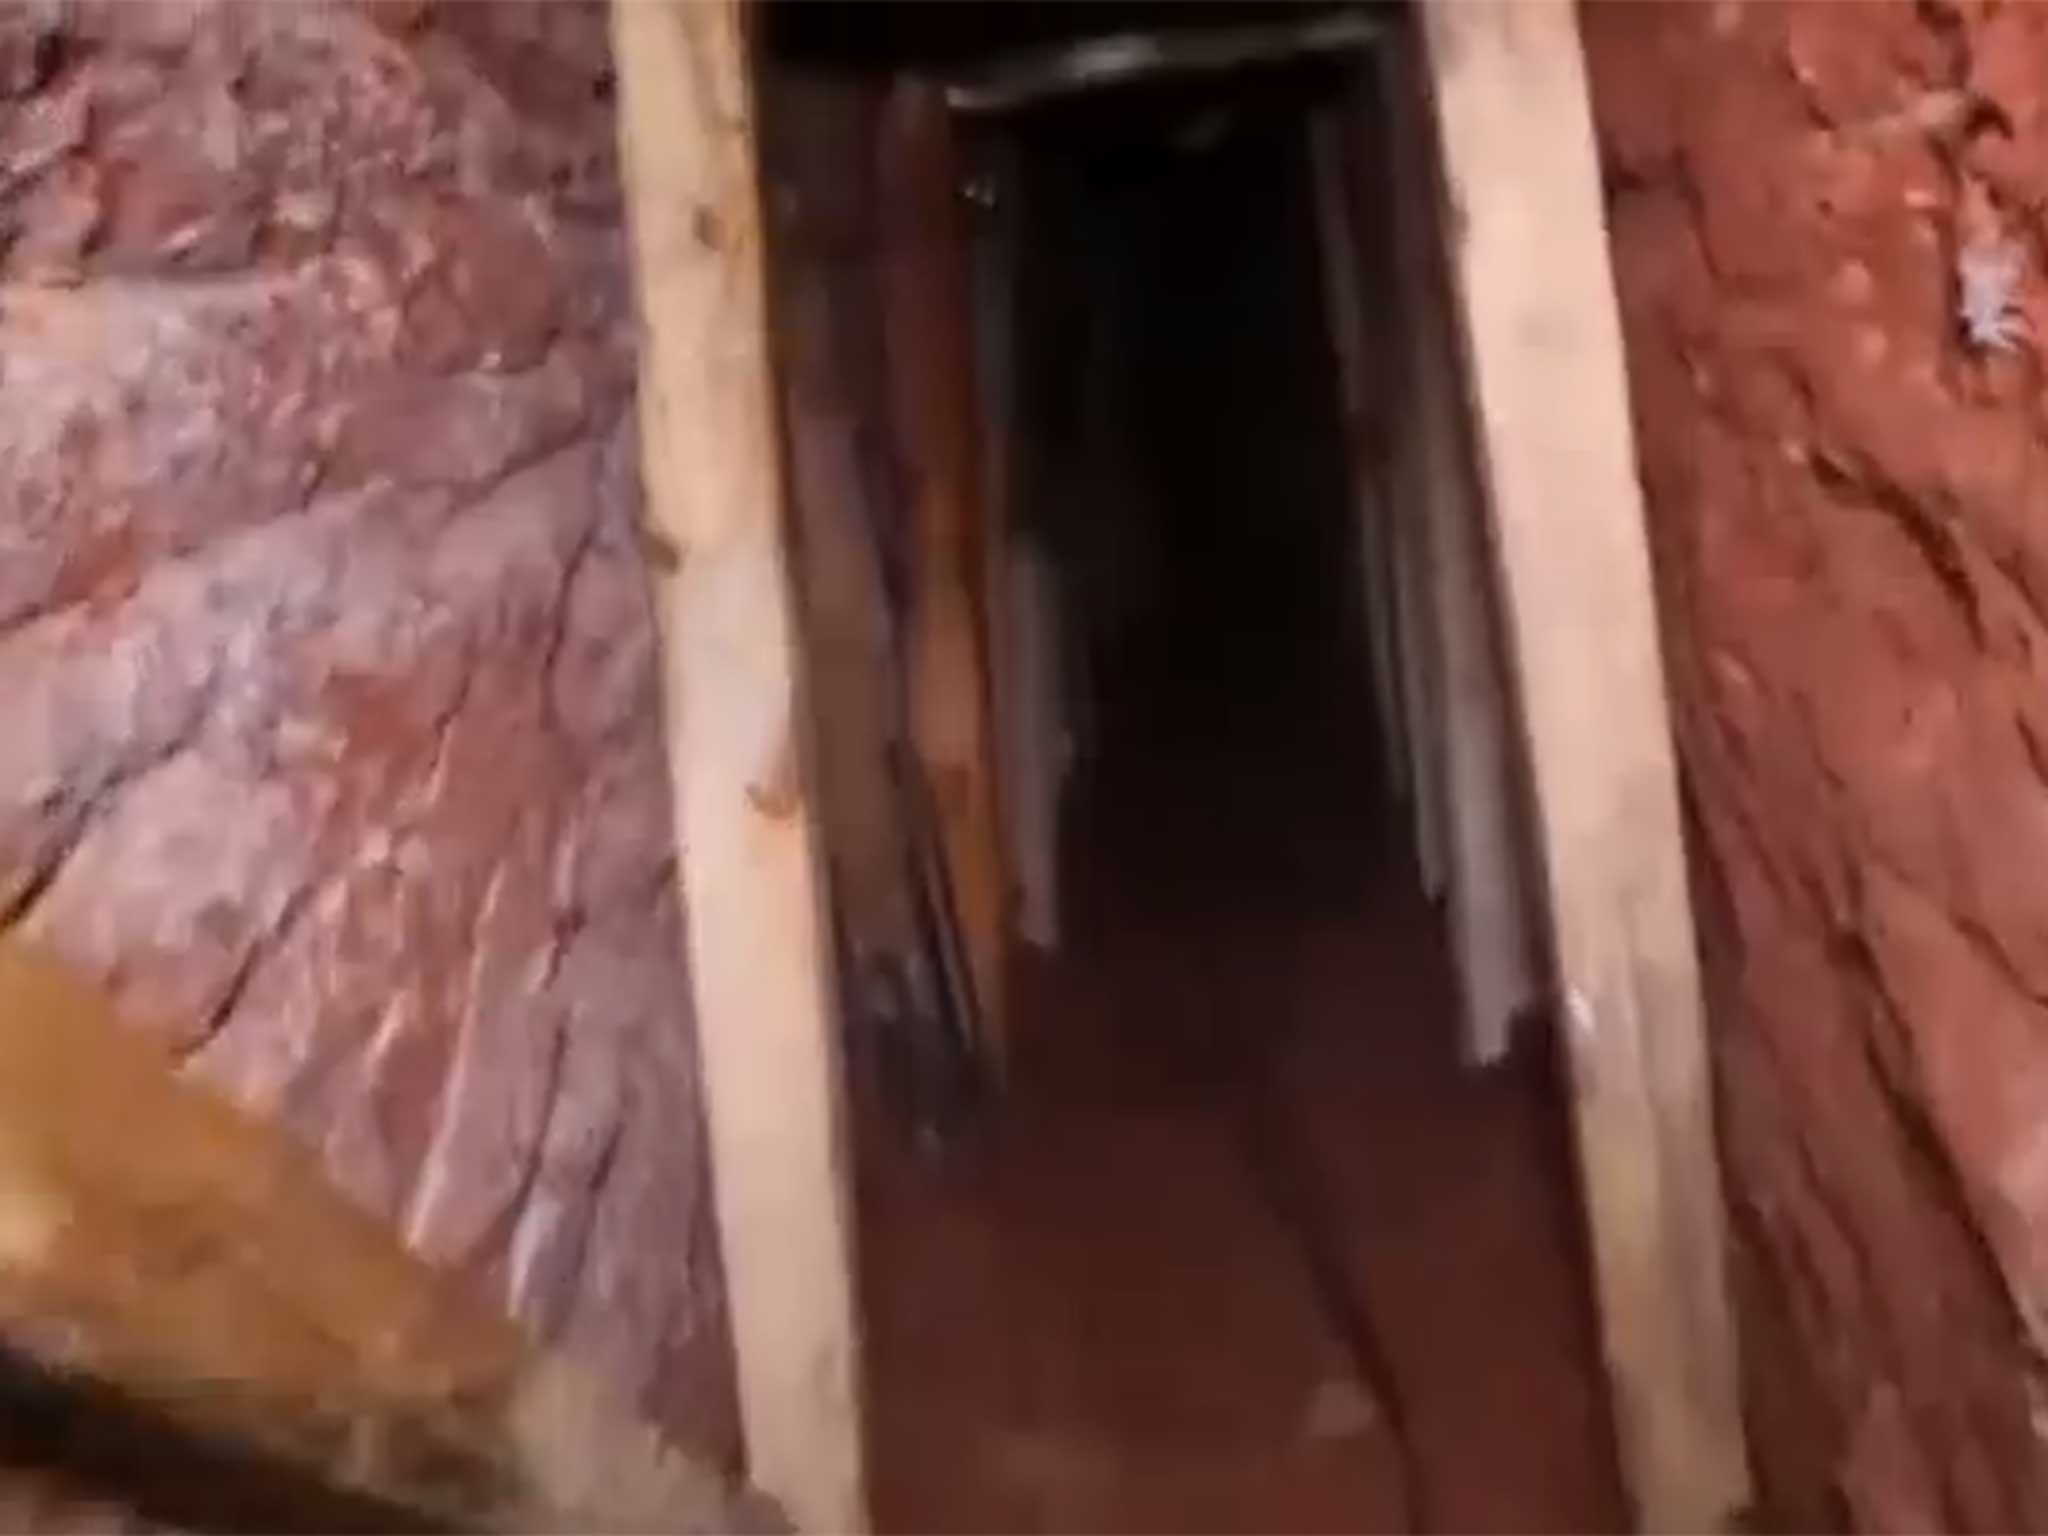 The tunnel stretches from a town in Arizona into Mexico